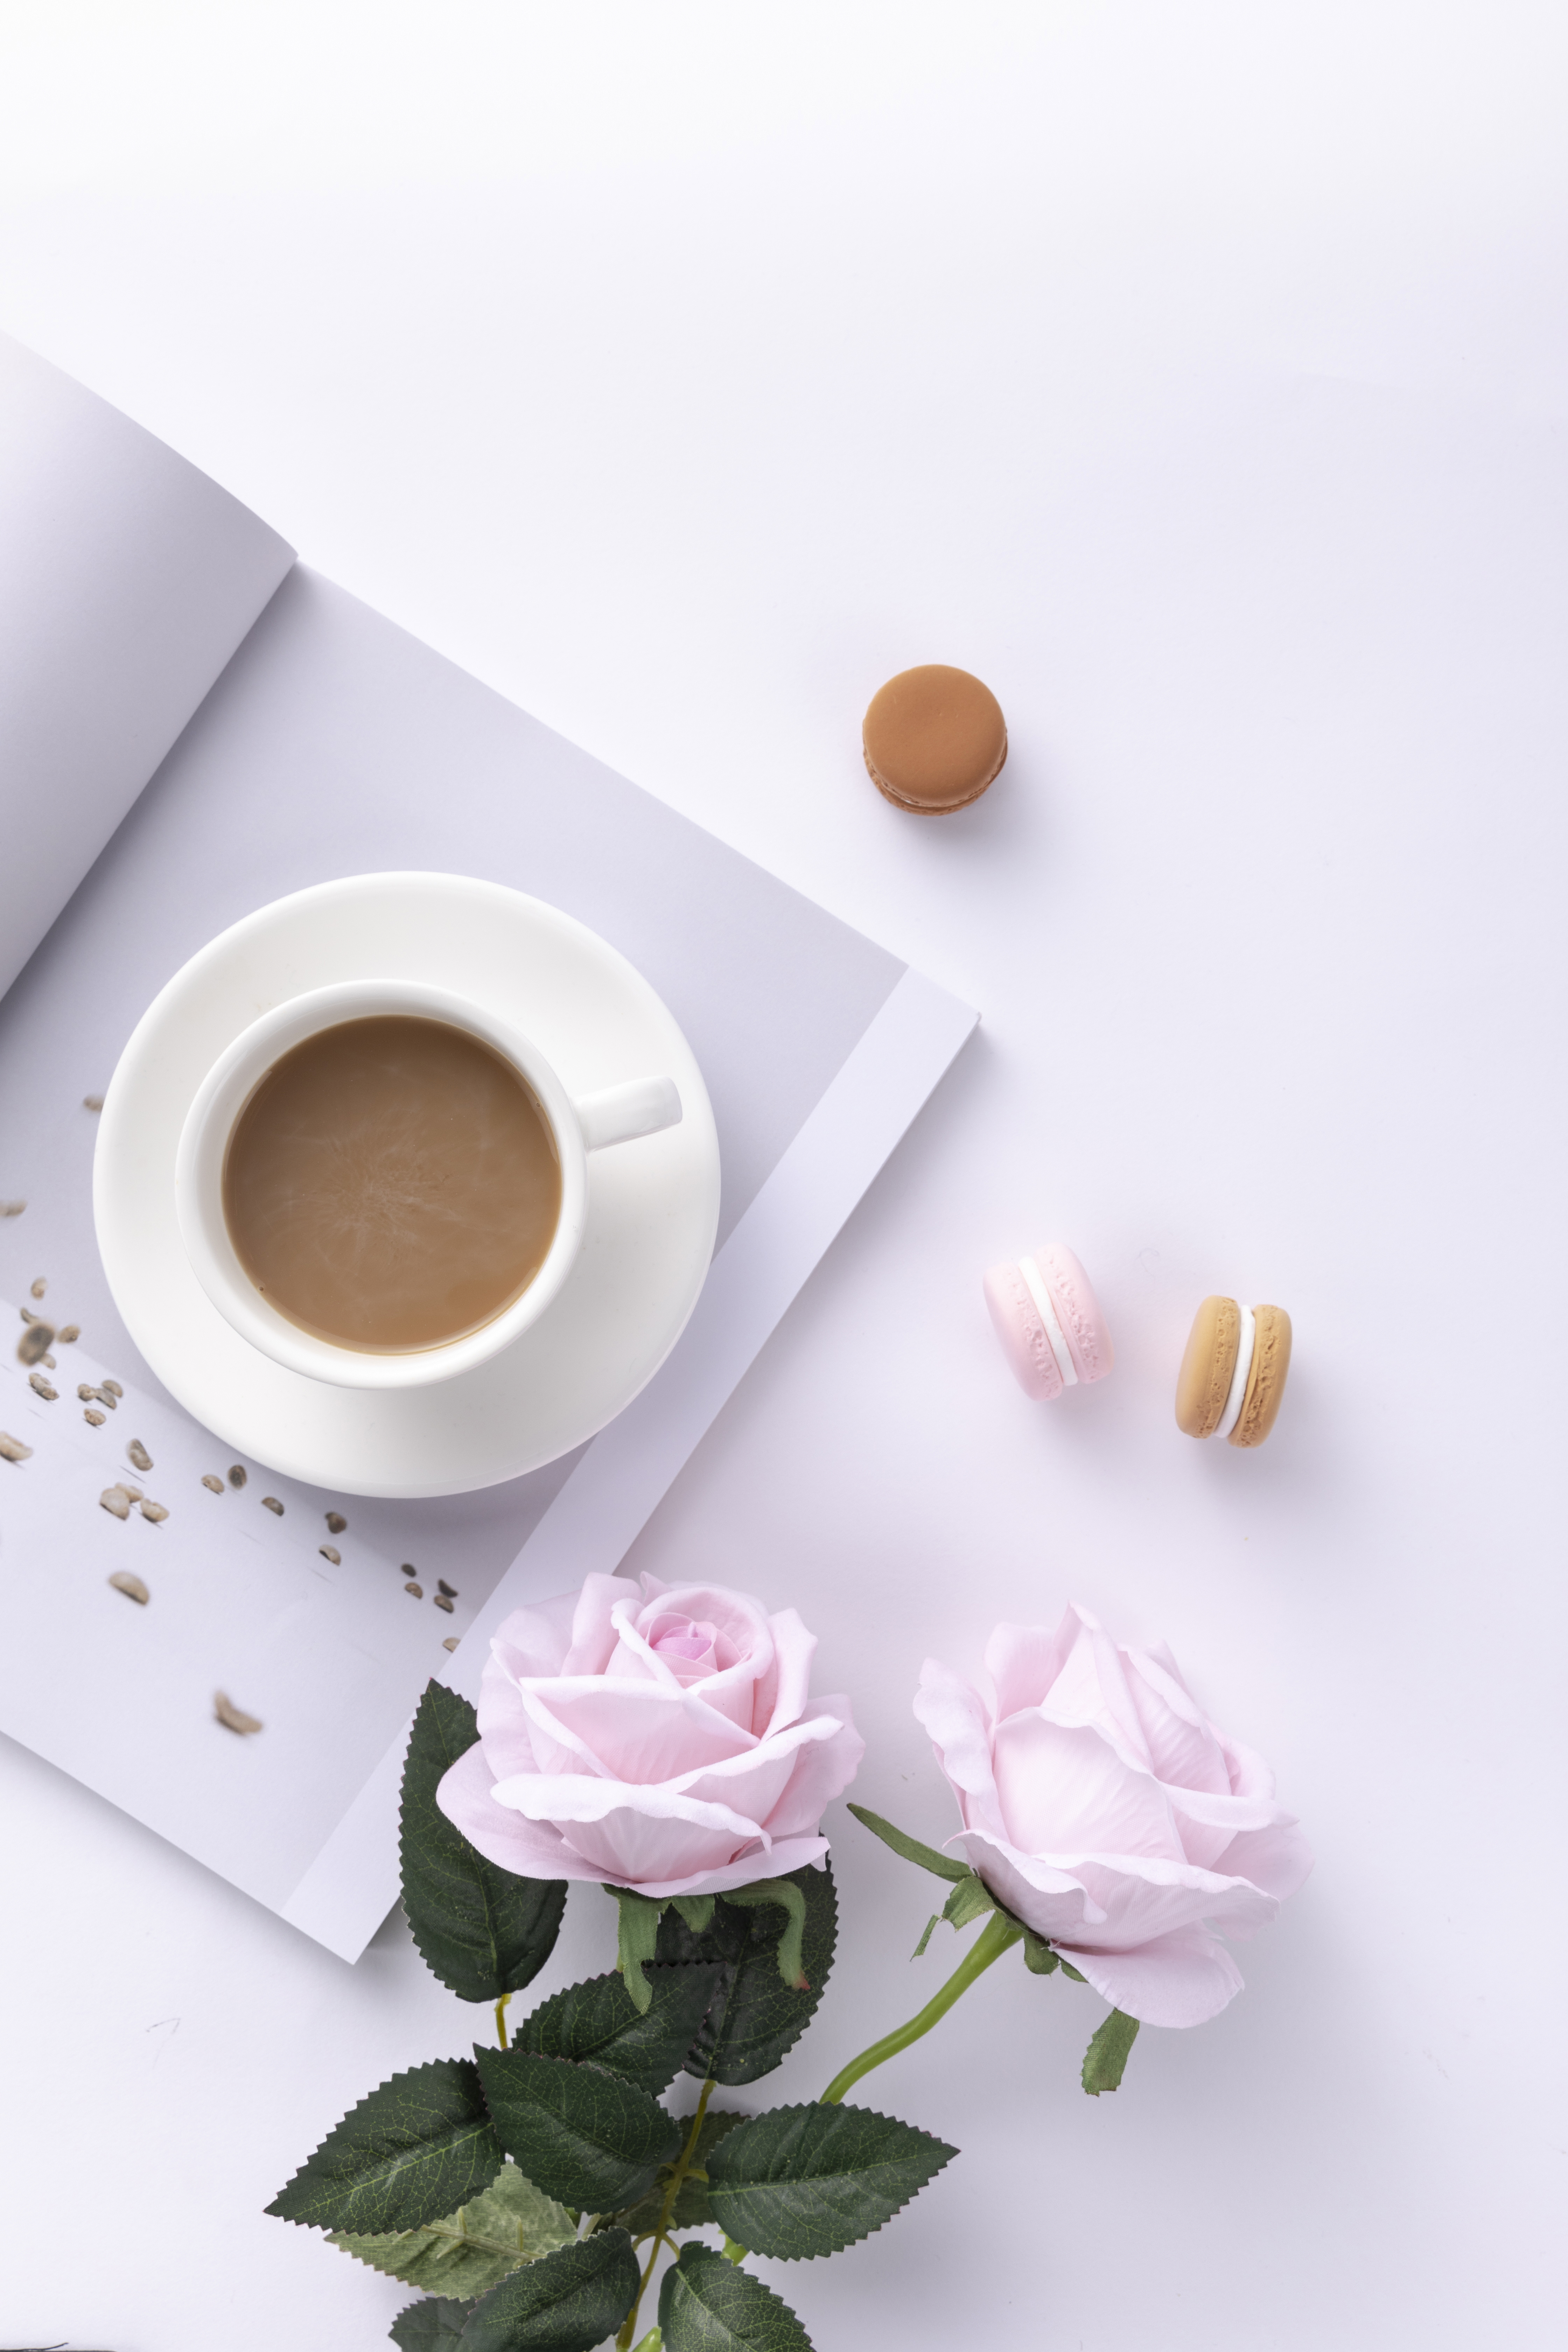 Coffee Coffee Cup Book Cover Macarons White Flowers 4480x6720